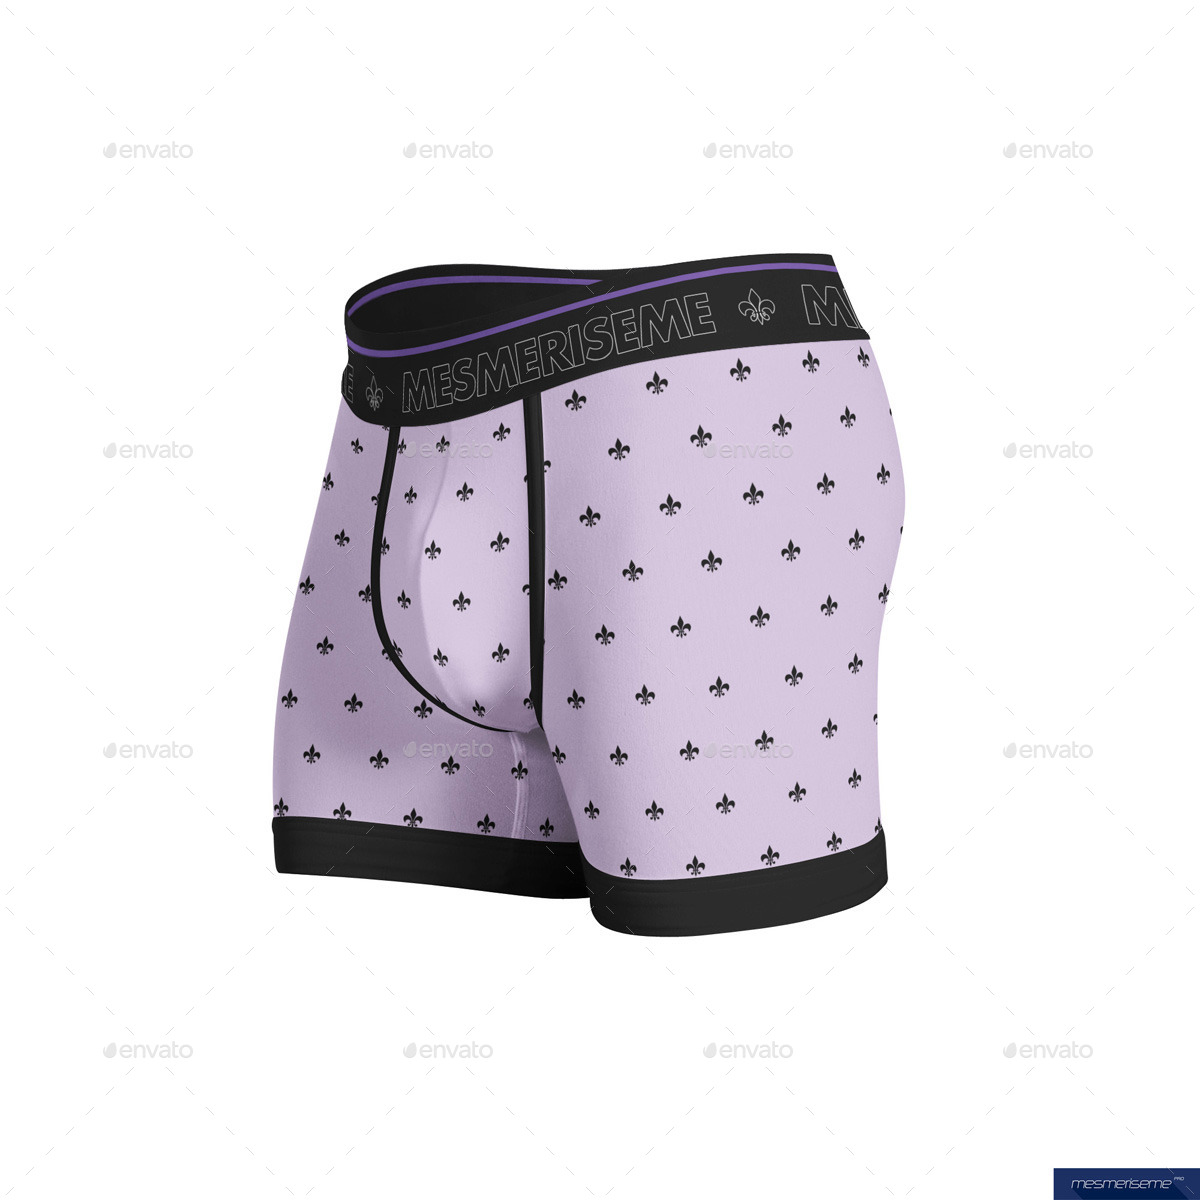 Download Trunks and Boxer Briefs Boxers Mock-up by mesmeriseme_pro ...